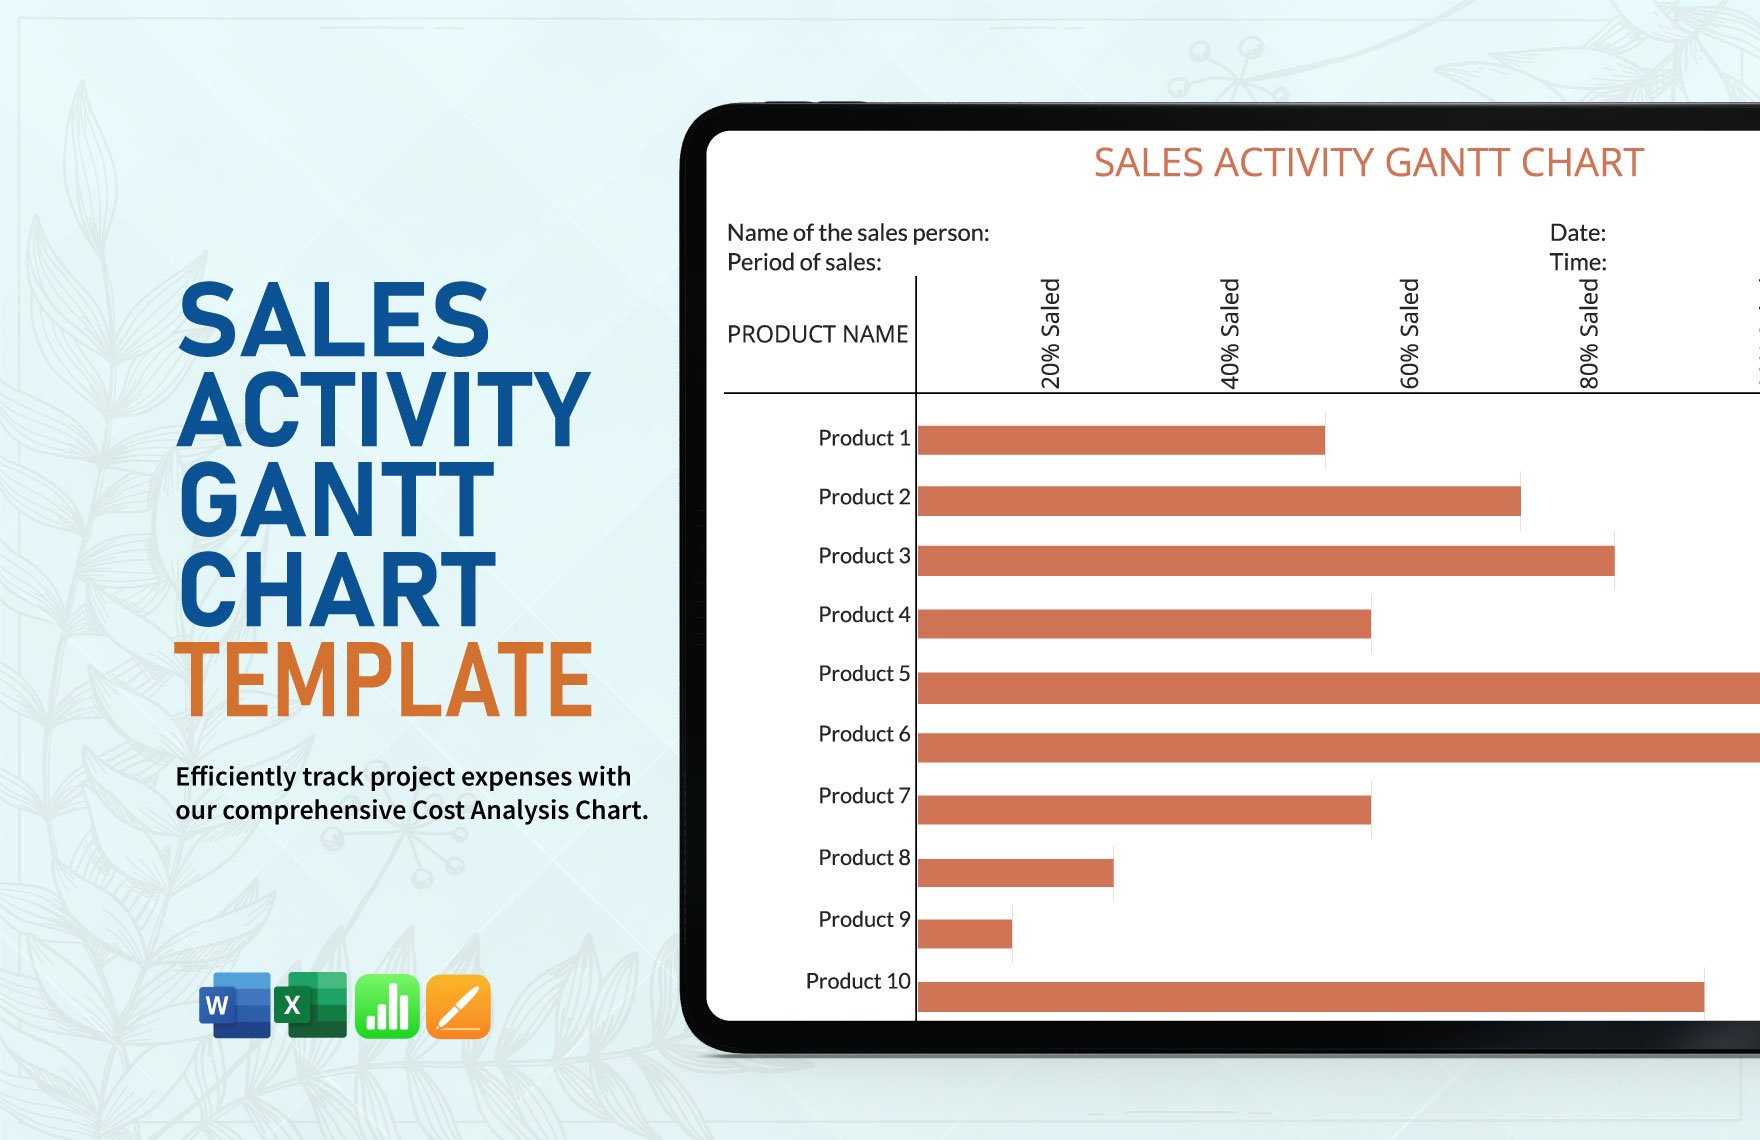 Sales Activity Gantt Chart Template in Word, Excel, Apple Pages, Apple Numbers